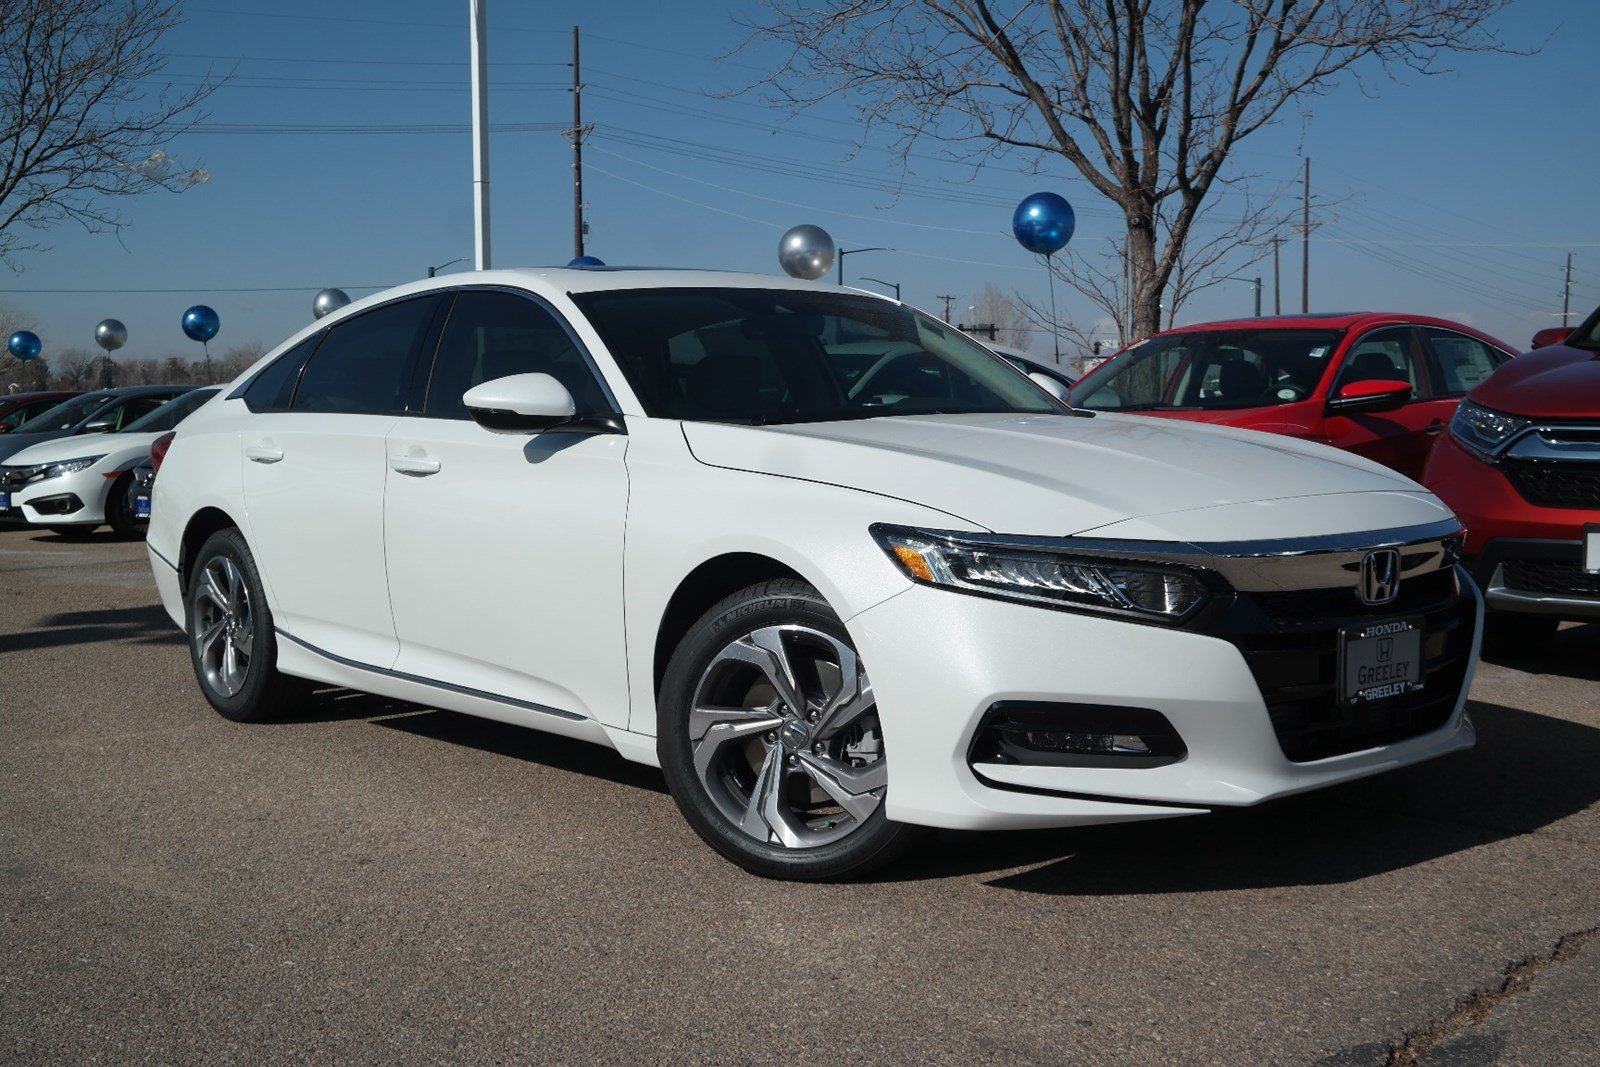 New 2019 Honda Accord EXL 2.0T 4dr Car in Greeley 19H362